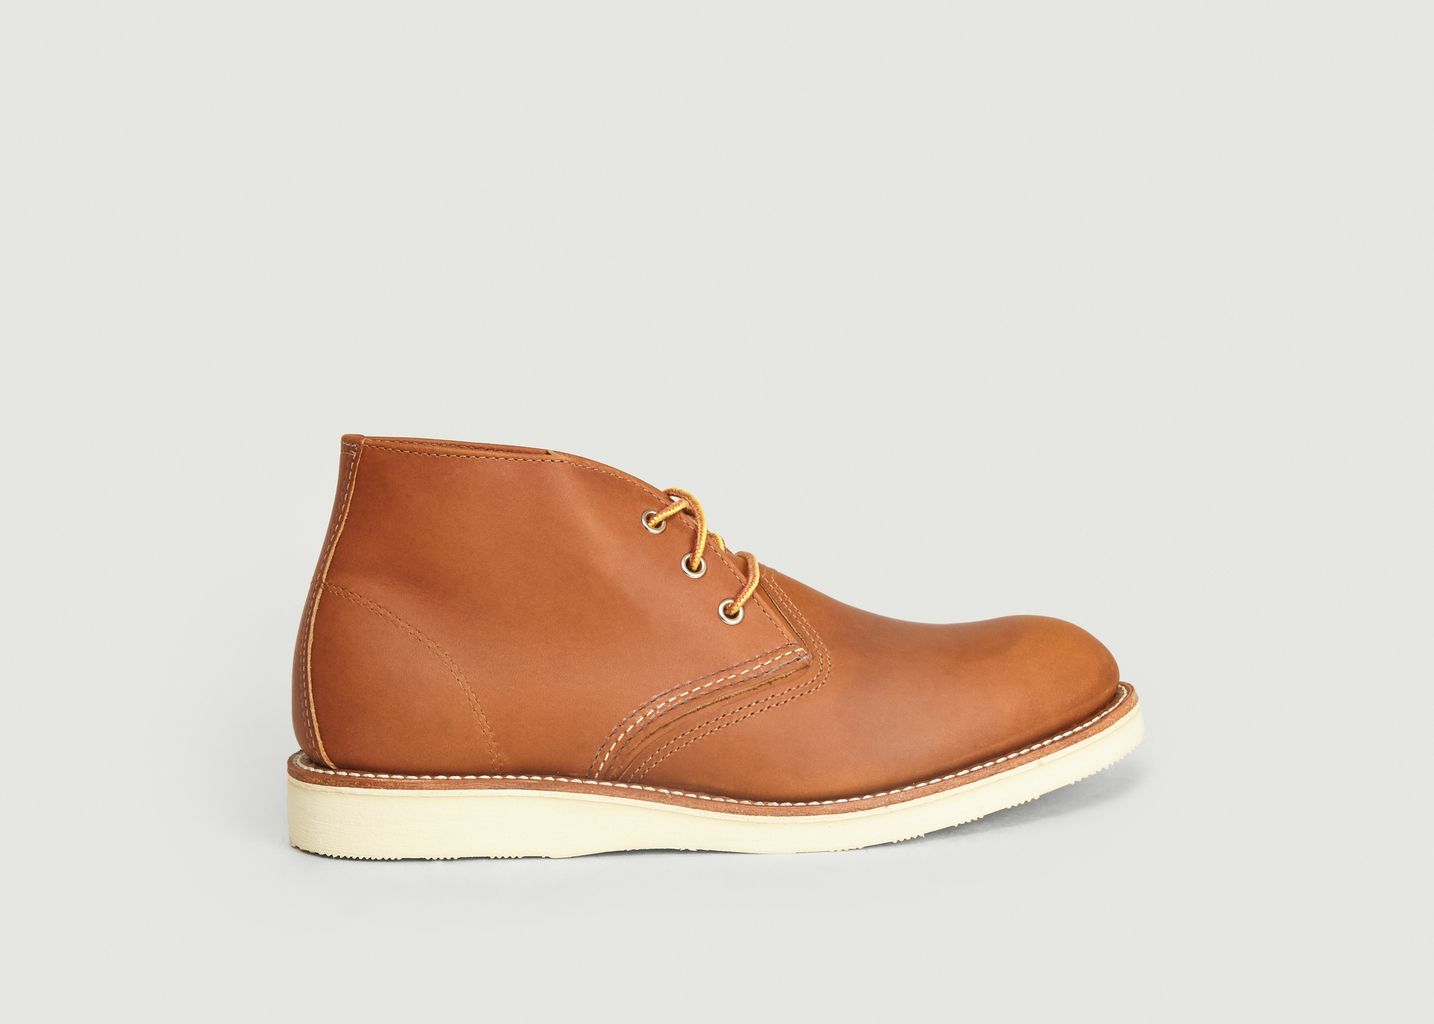 Boots Work Chukka Oro-iginal Camel - Red Wing Shoes